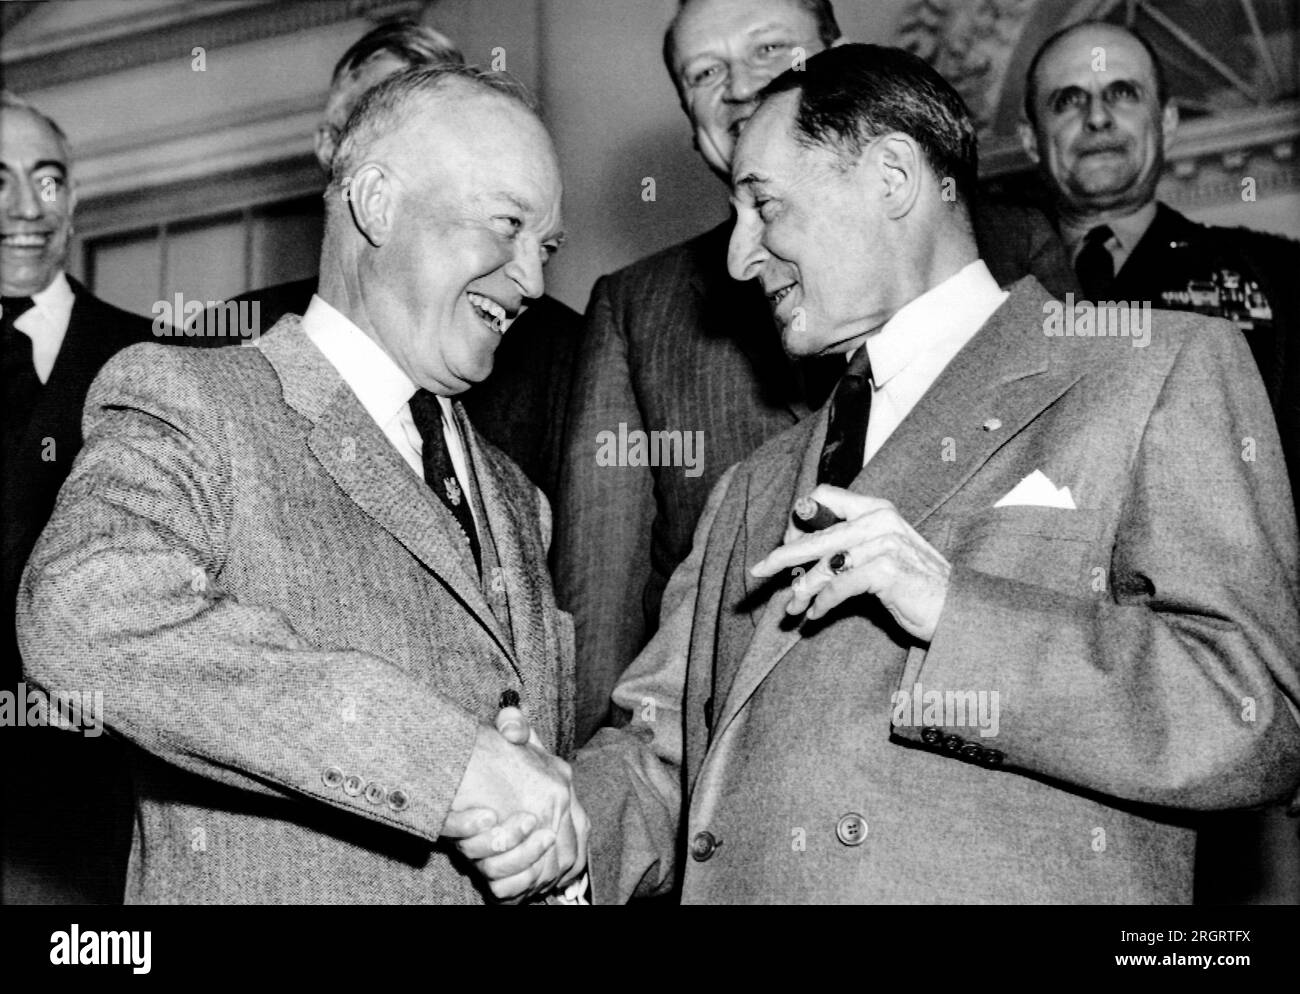 Washington, D.C.:  March 18, 1954 President Dwight D. Eisenhower and Gen. Douglas MacArthur shake hands after having had lunch together at the White House. Stock Photo